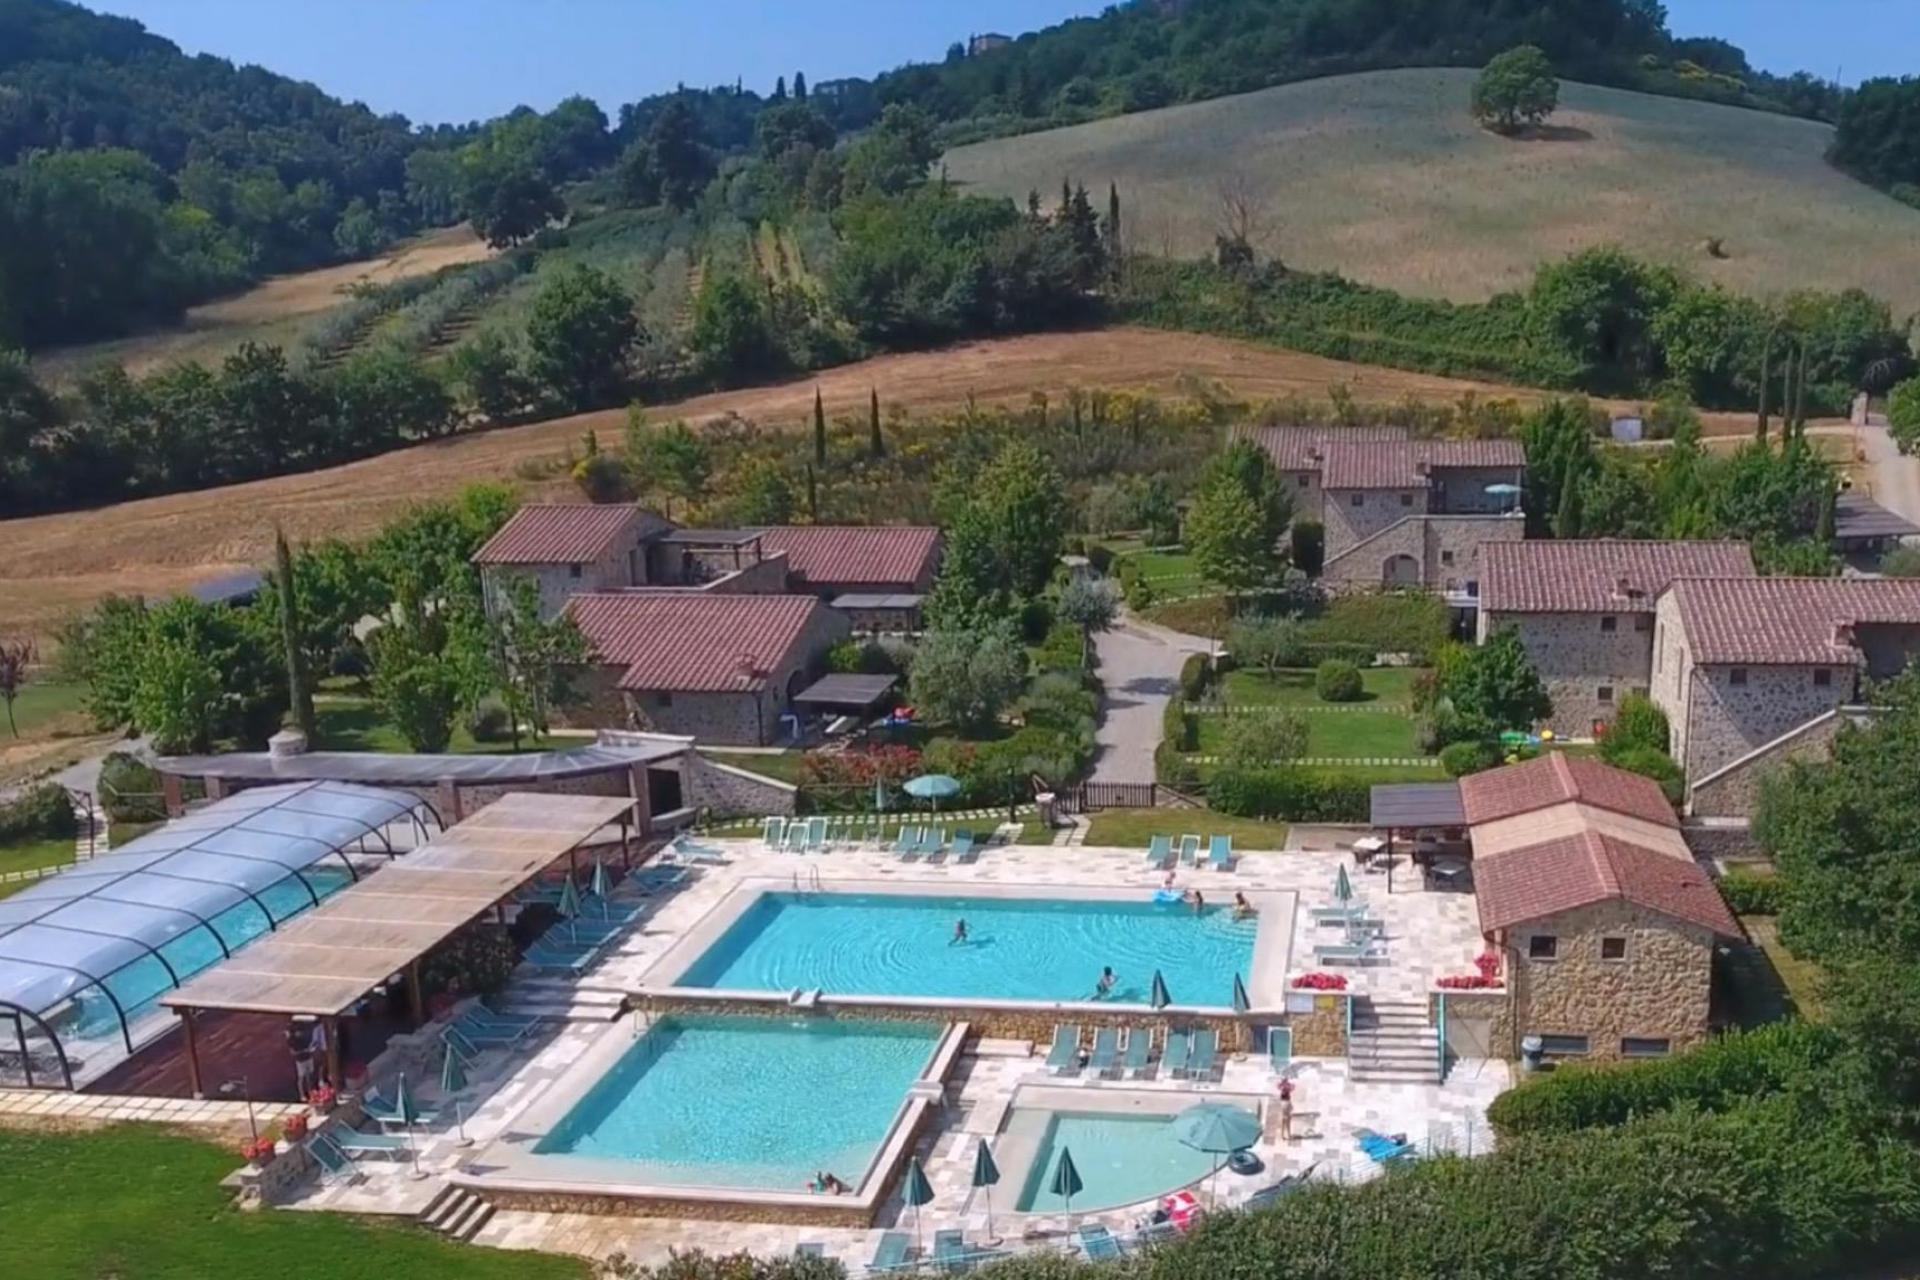 Family-friendly country resort with 4 beautiful swimming pools